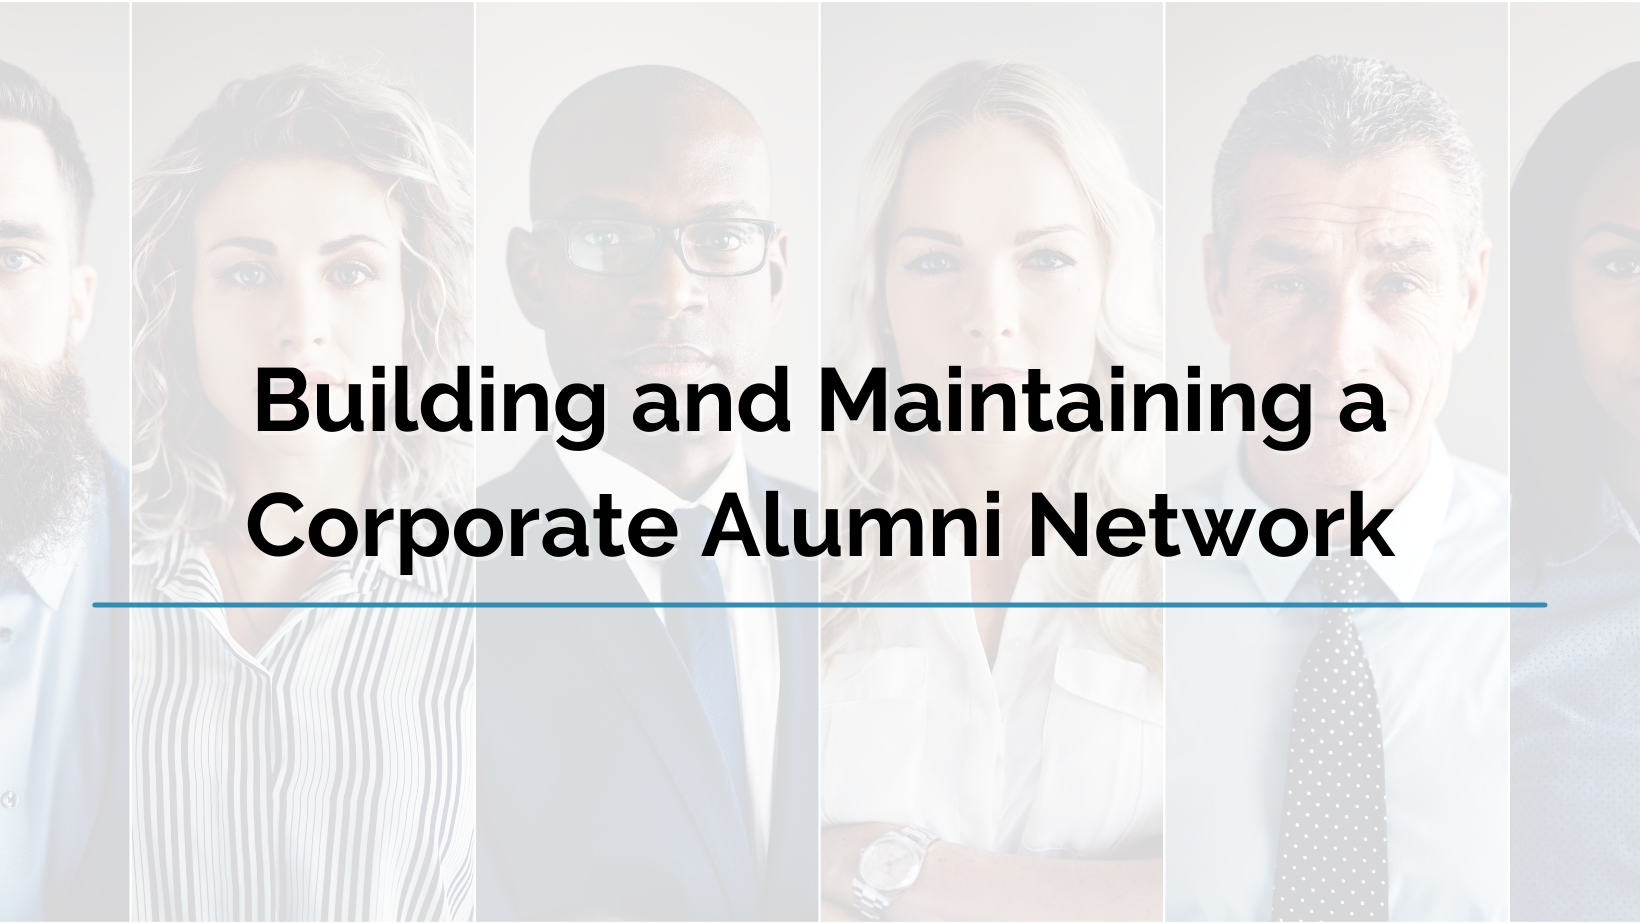 Building and Maintaining a Corporate Alumni Network title over former employee collage